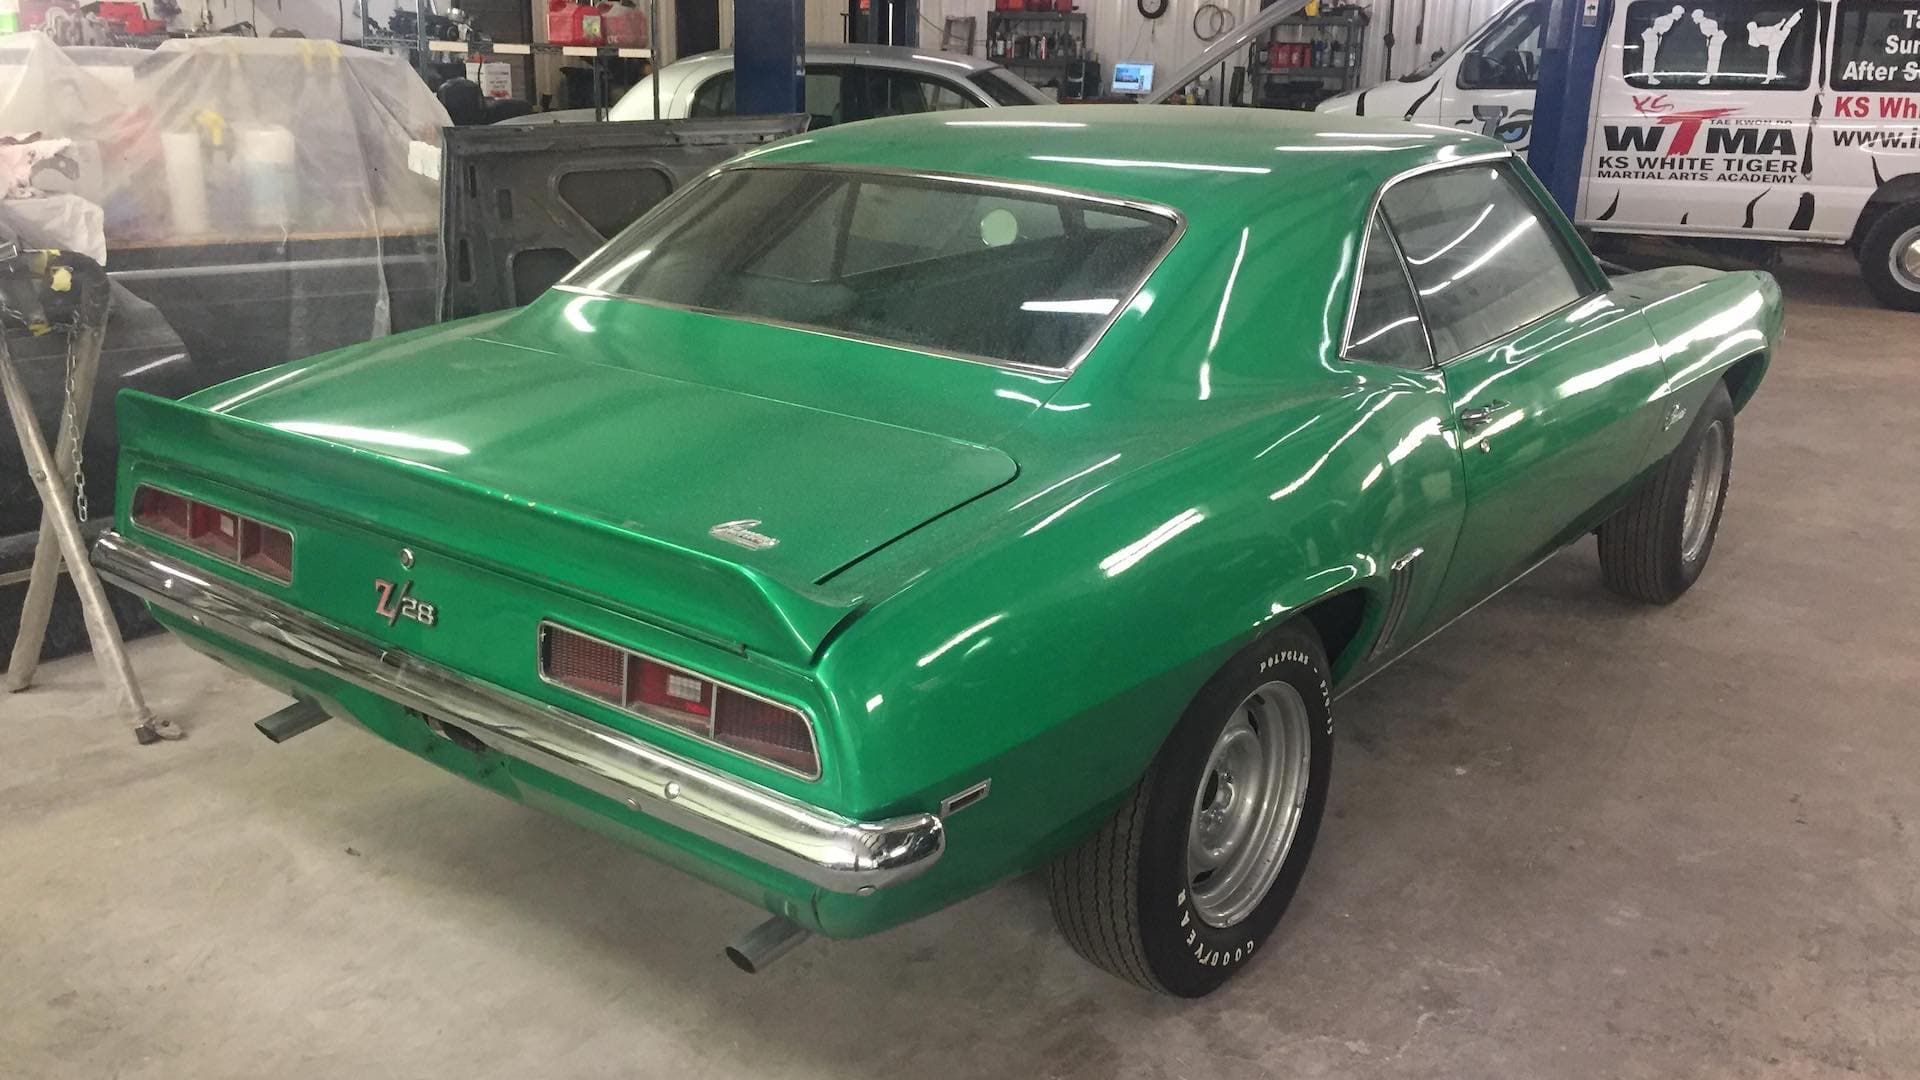 Stolen 1969 Chevrolet Camaro Rediscovered by Accident 17 Years After Theft